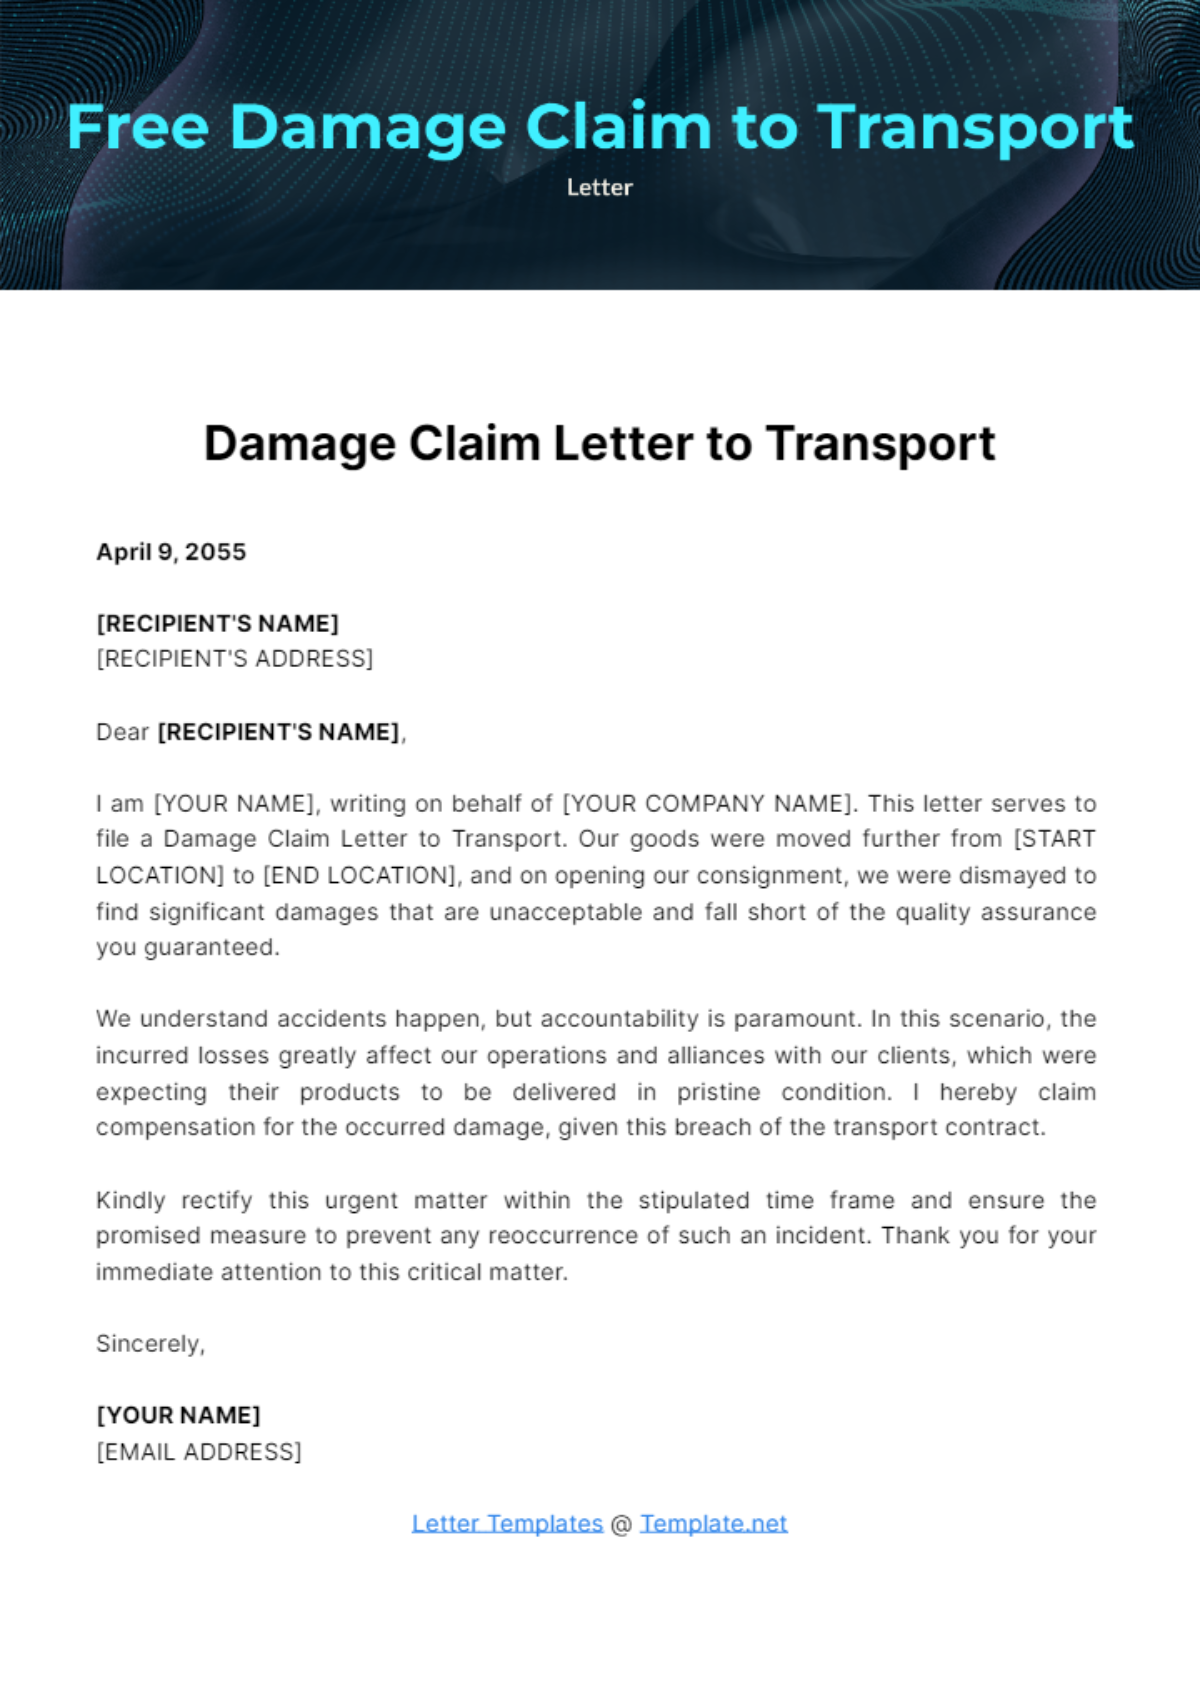 Damage Claim Letter to Transport Template